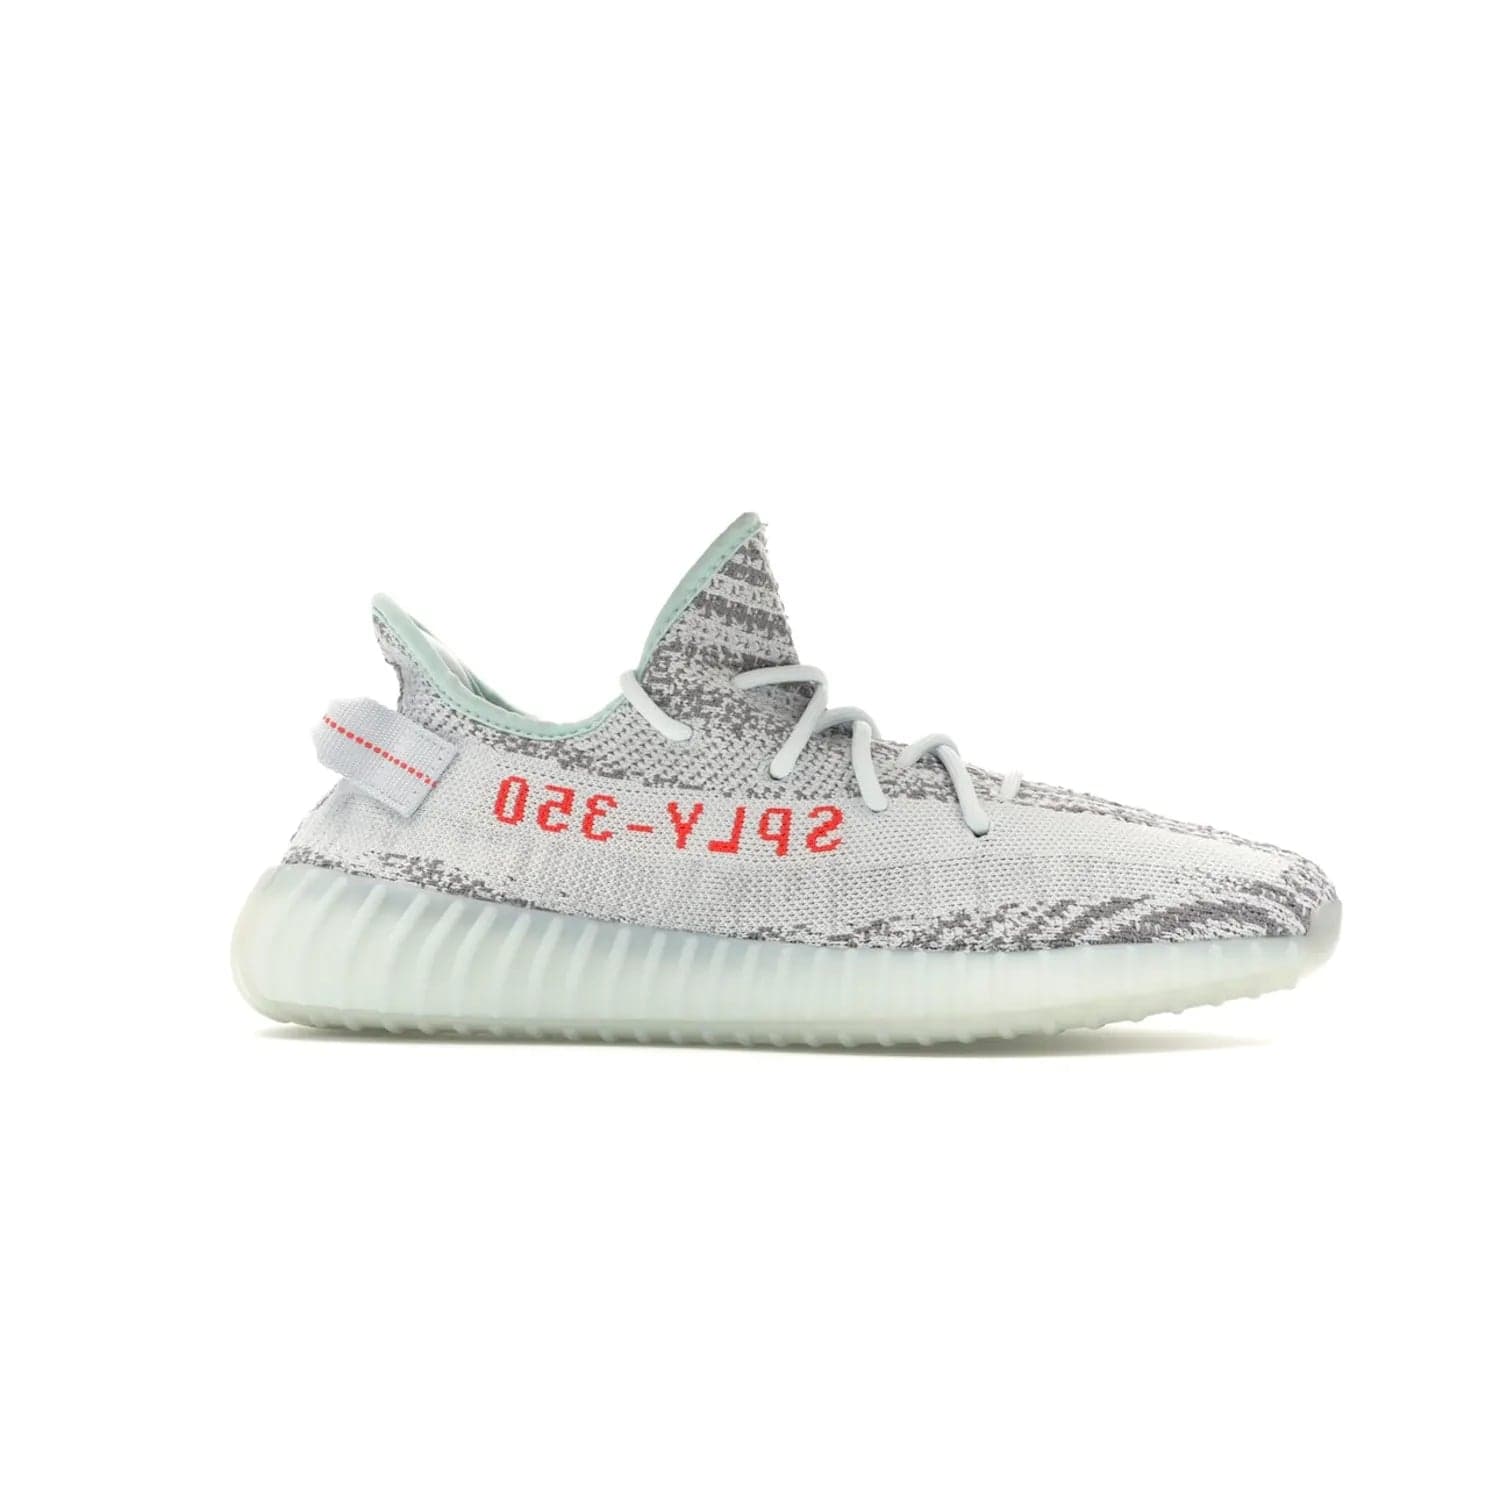 adidas Yeezy Boost 350 V2 Blue Tint - Image 2 - Only at www.BallersClubKickz.com - The adidas Yeezy Boost 350 V2 Blue Tint merges fashion and functionality with its Primeknit upper and Boost sole. Released in December 2017, this luxurious sneaker is perfect for making a stylish statement.